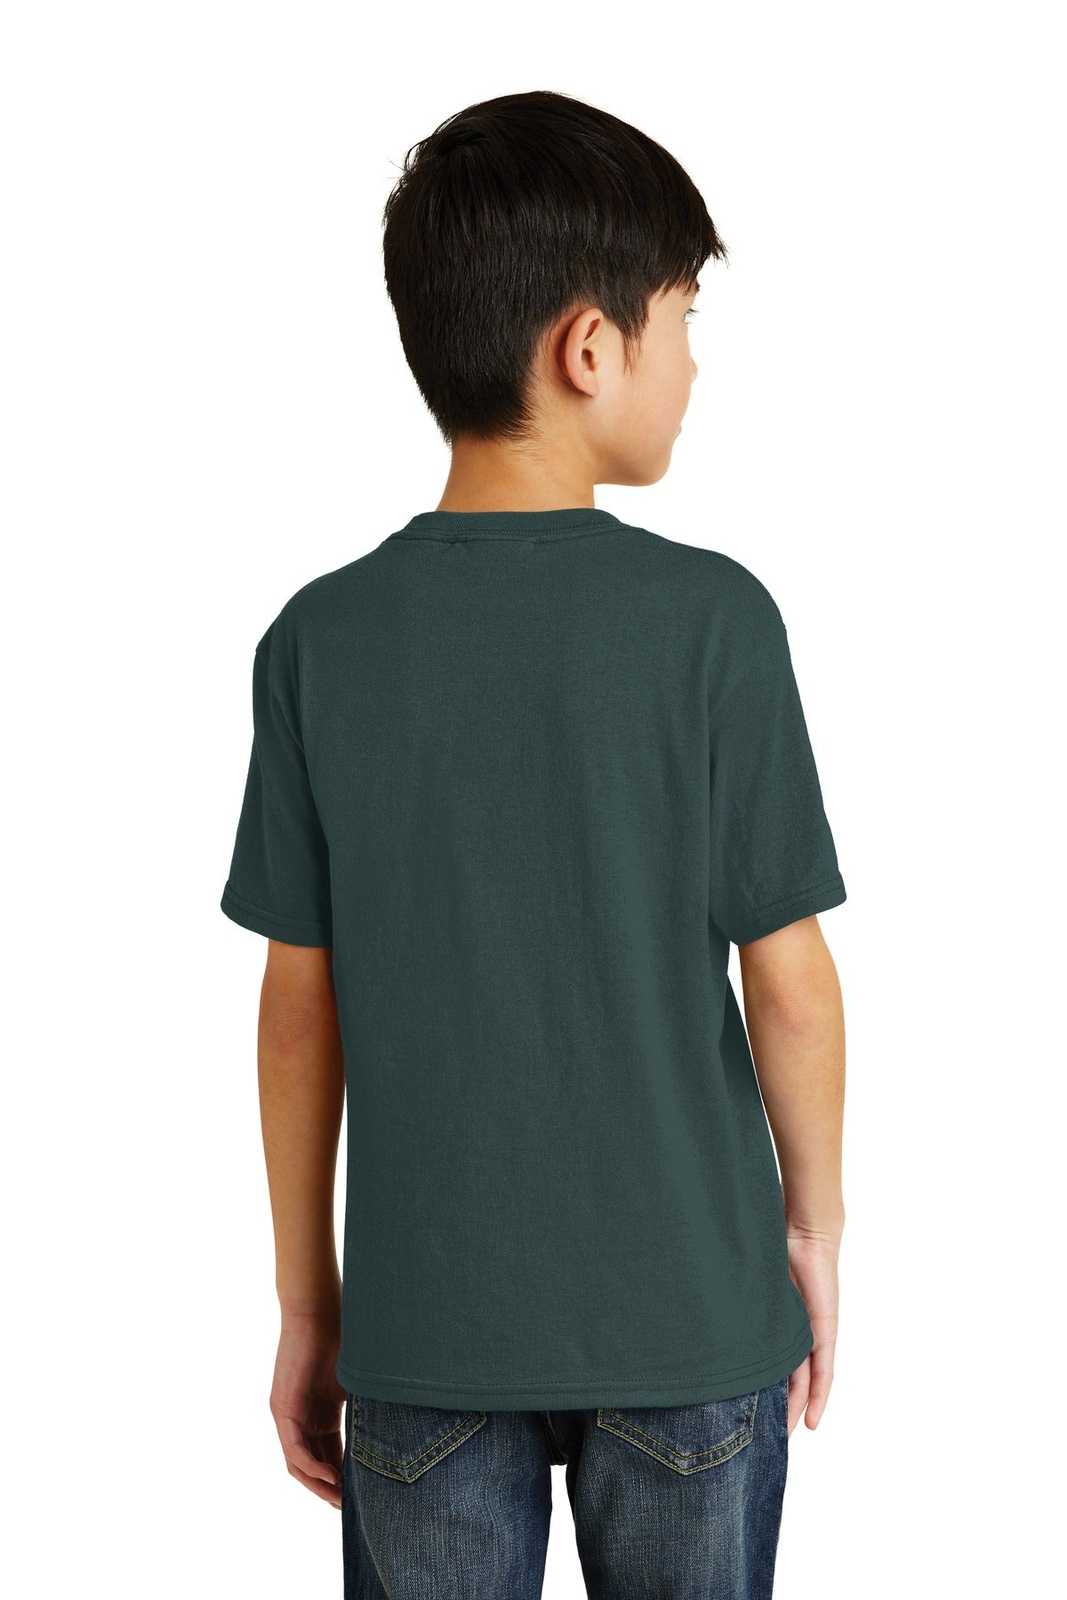 Port & Company PC55Y Youth Core Blend Tee - Dark Green - HIT a Double - 1